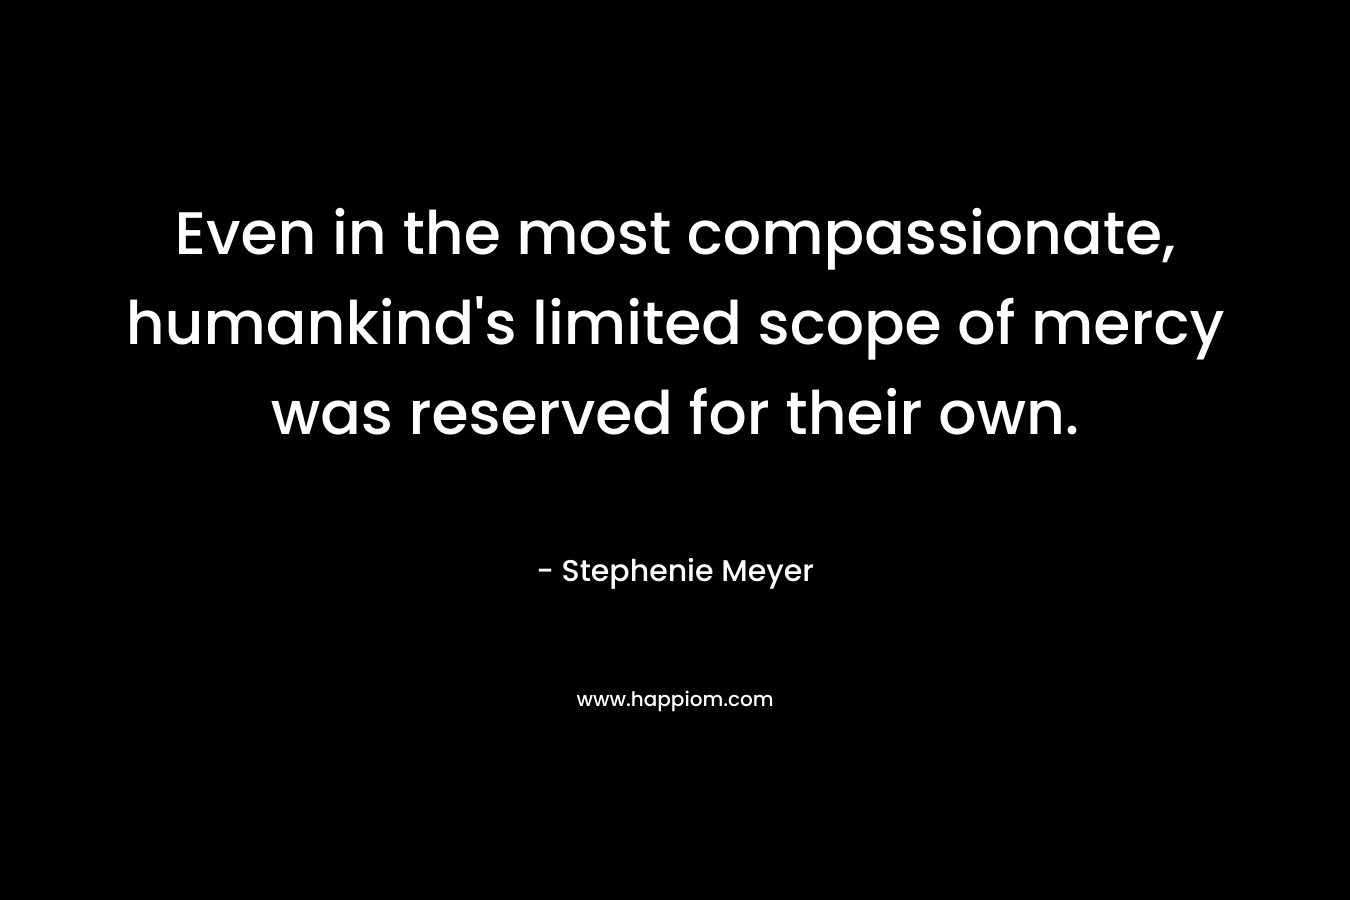 Even in the most compassionate, humankind’s limited scope of mercy was reserved for their own. – Stephenie Meyer